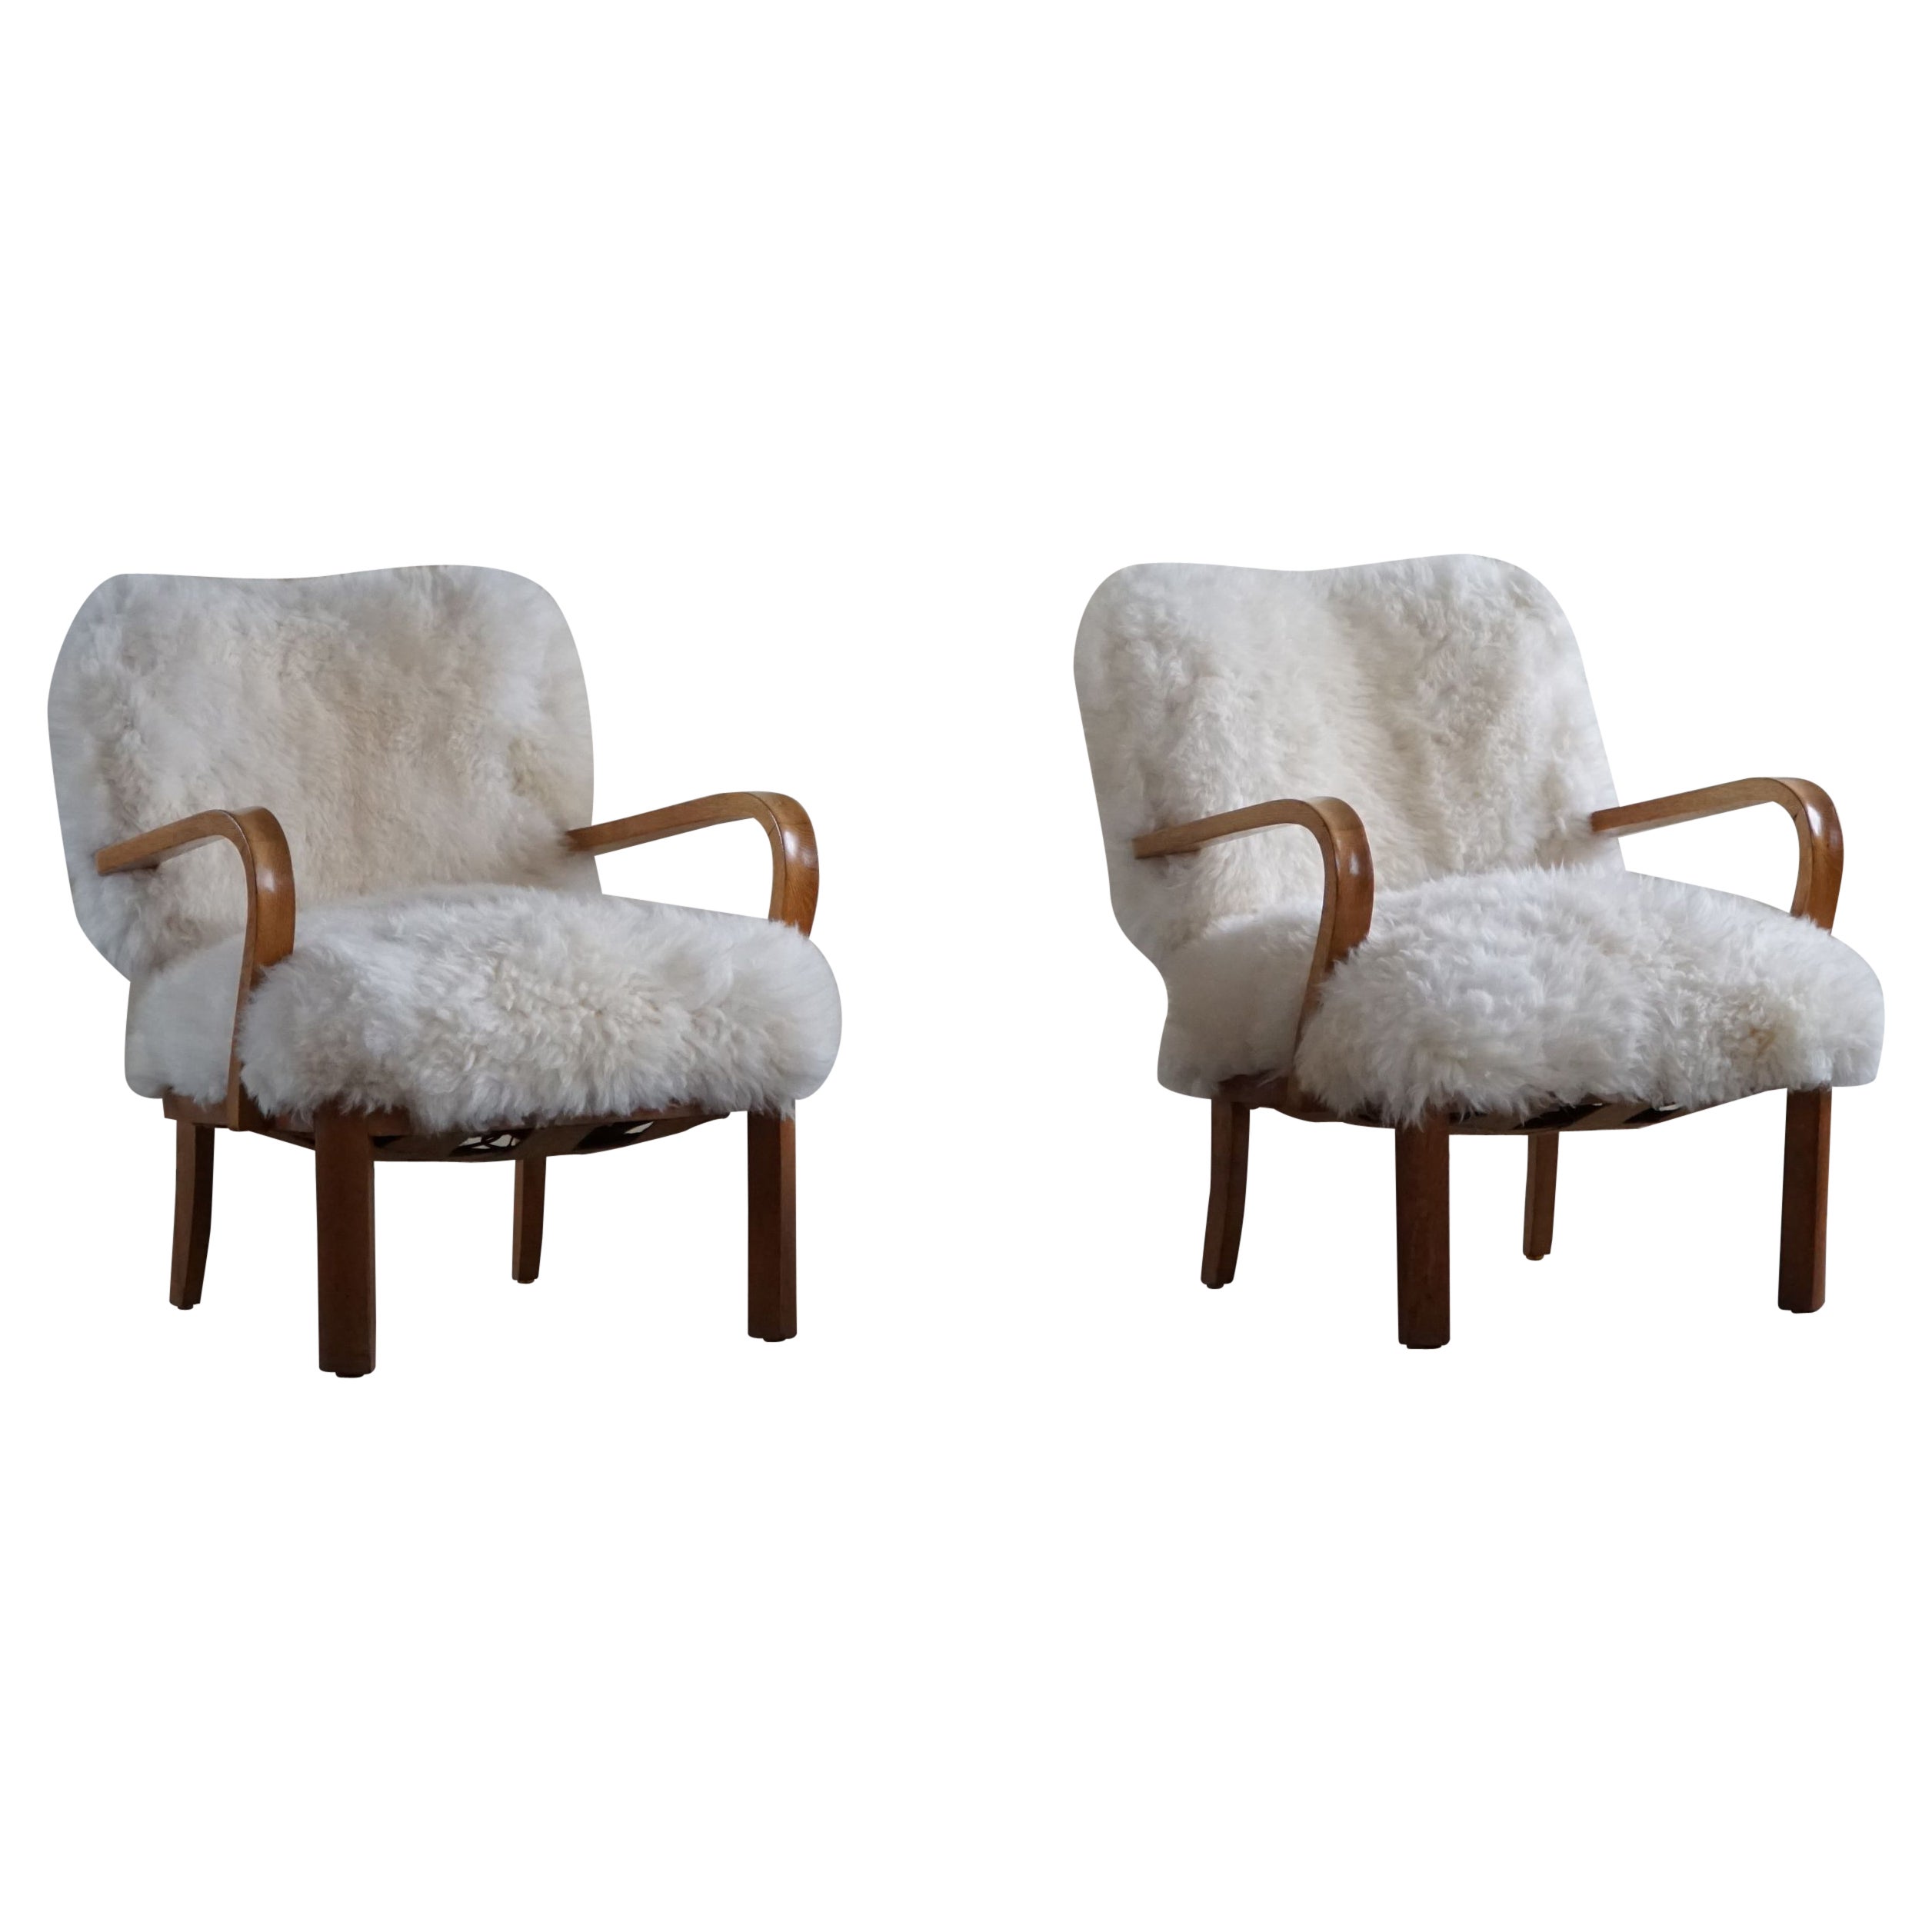 Danish Cabinetmaker, a Modern Pair of Lounge Chairs in Lambswool and Oak, 1950s